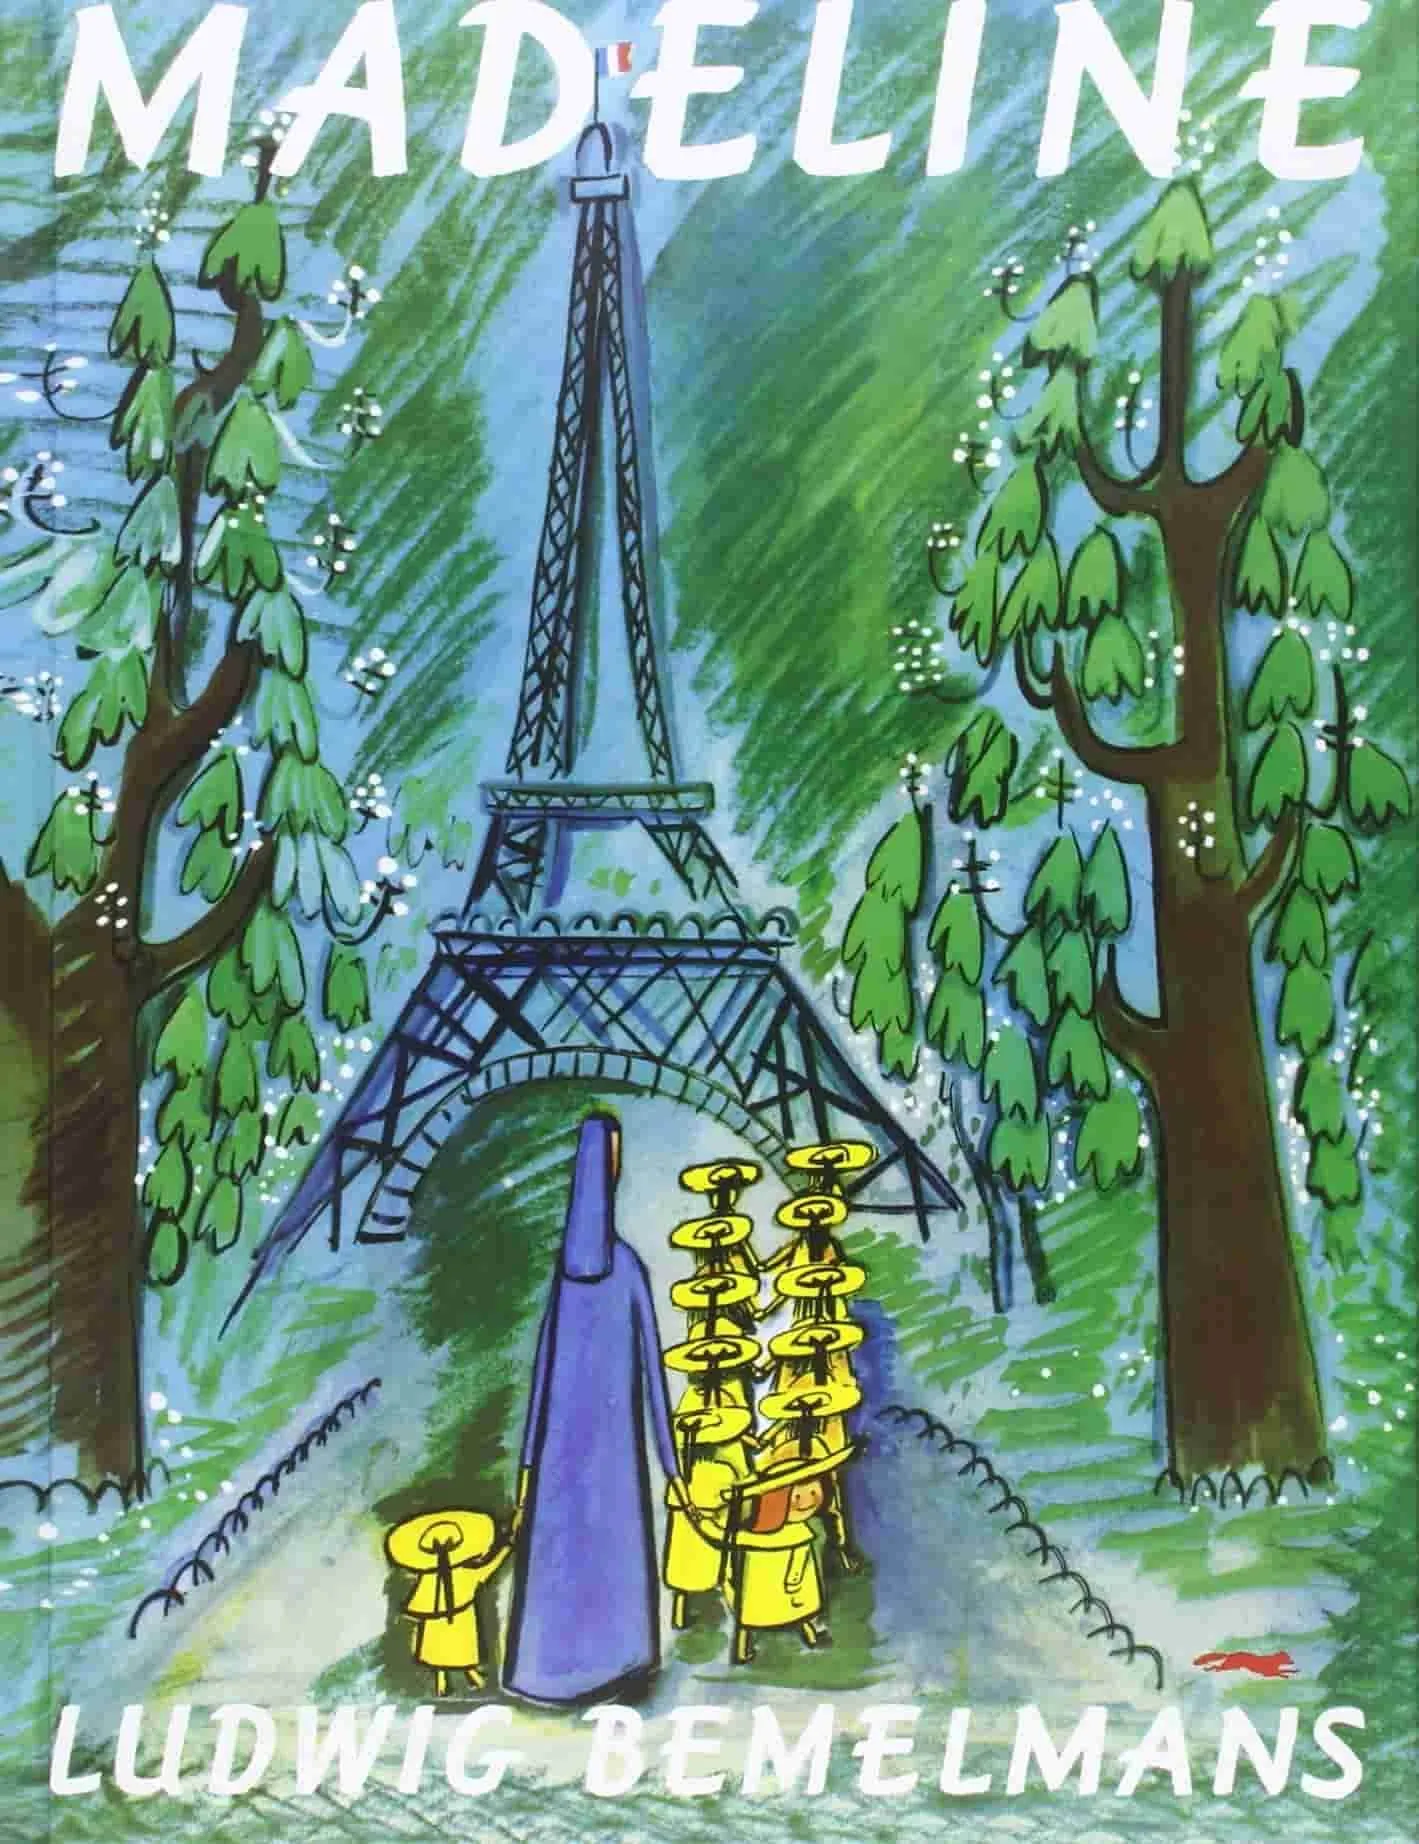 Madeline by Ludwig Bemelmans book cover.